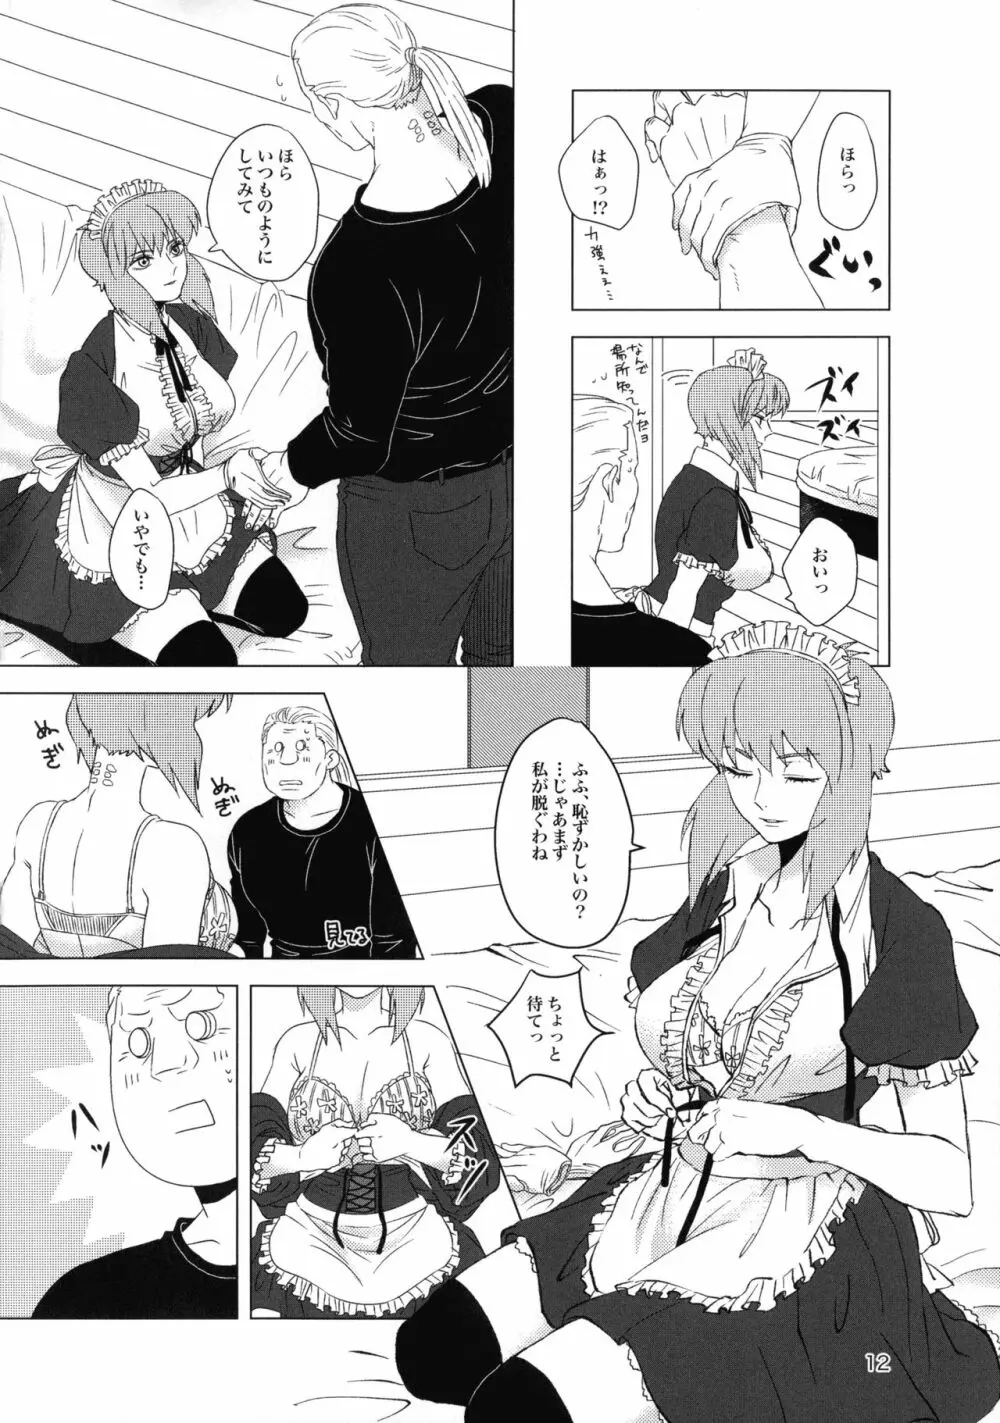 FRENCHMAIDCOSTUME BTMT - page12